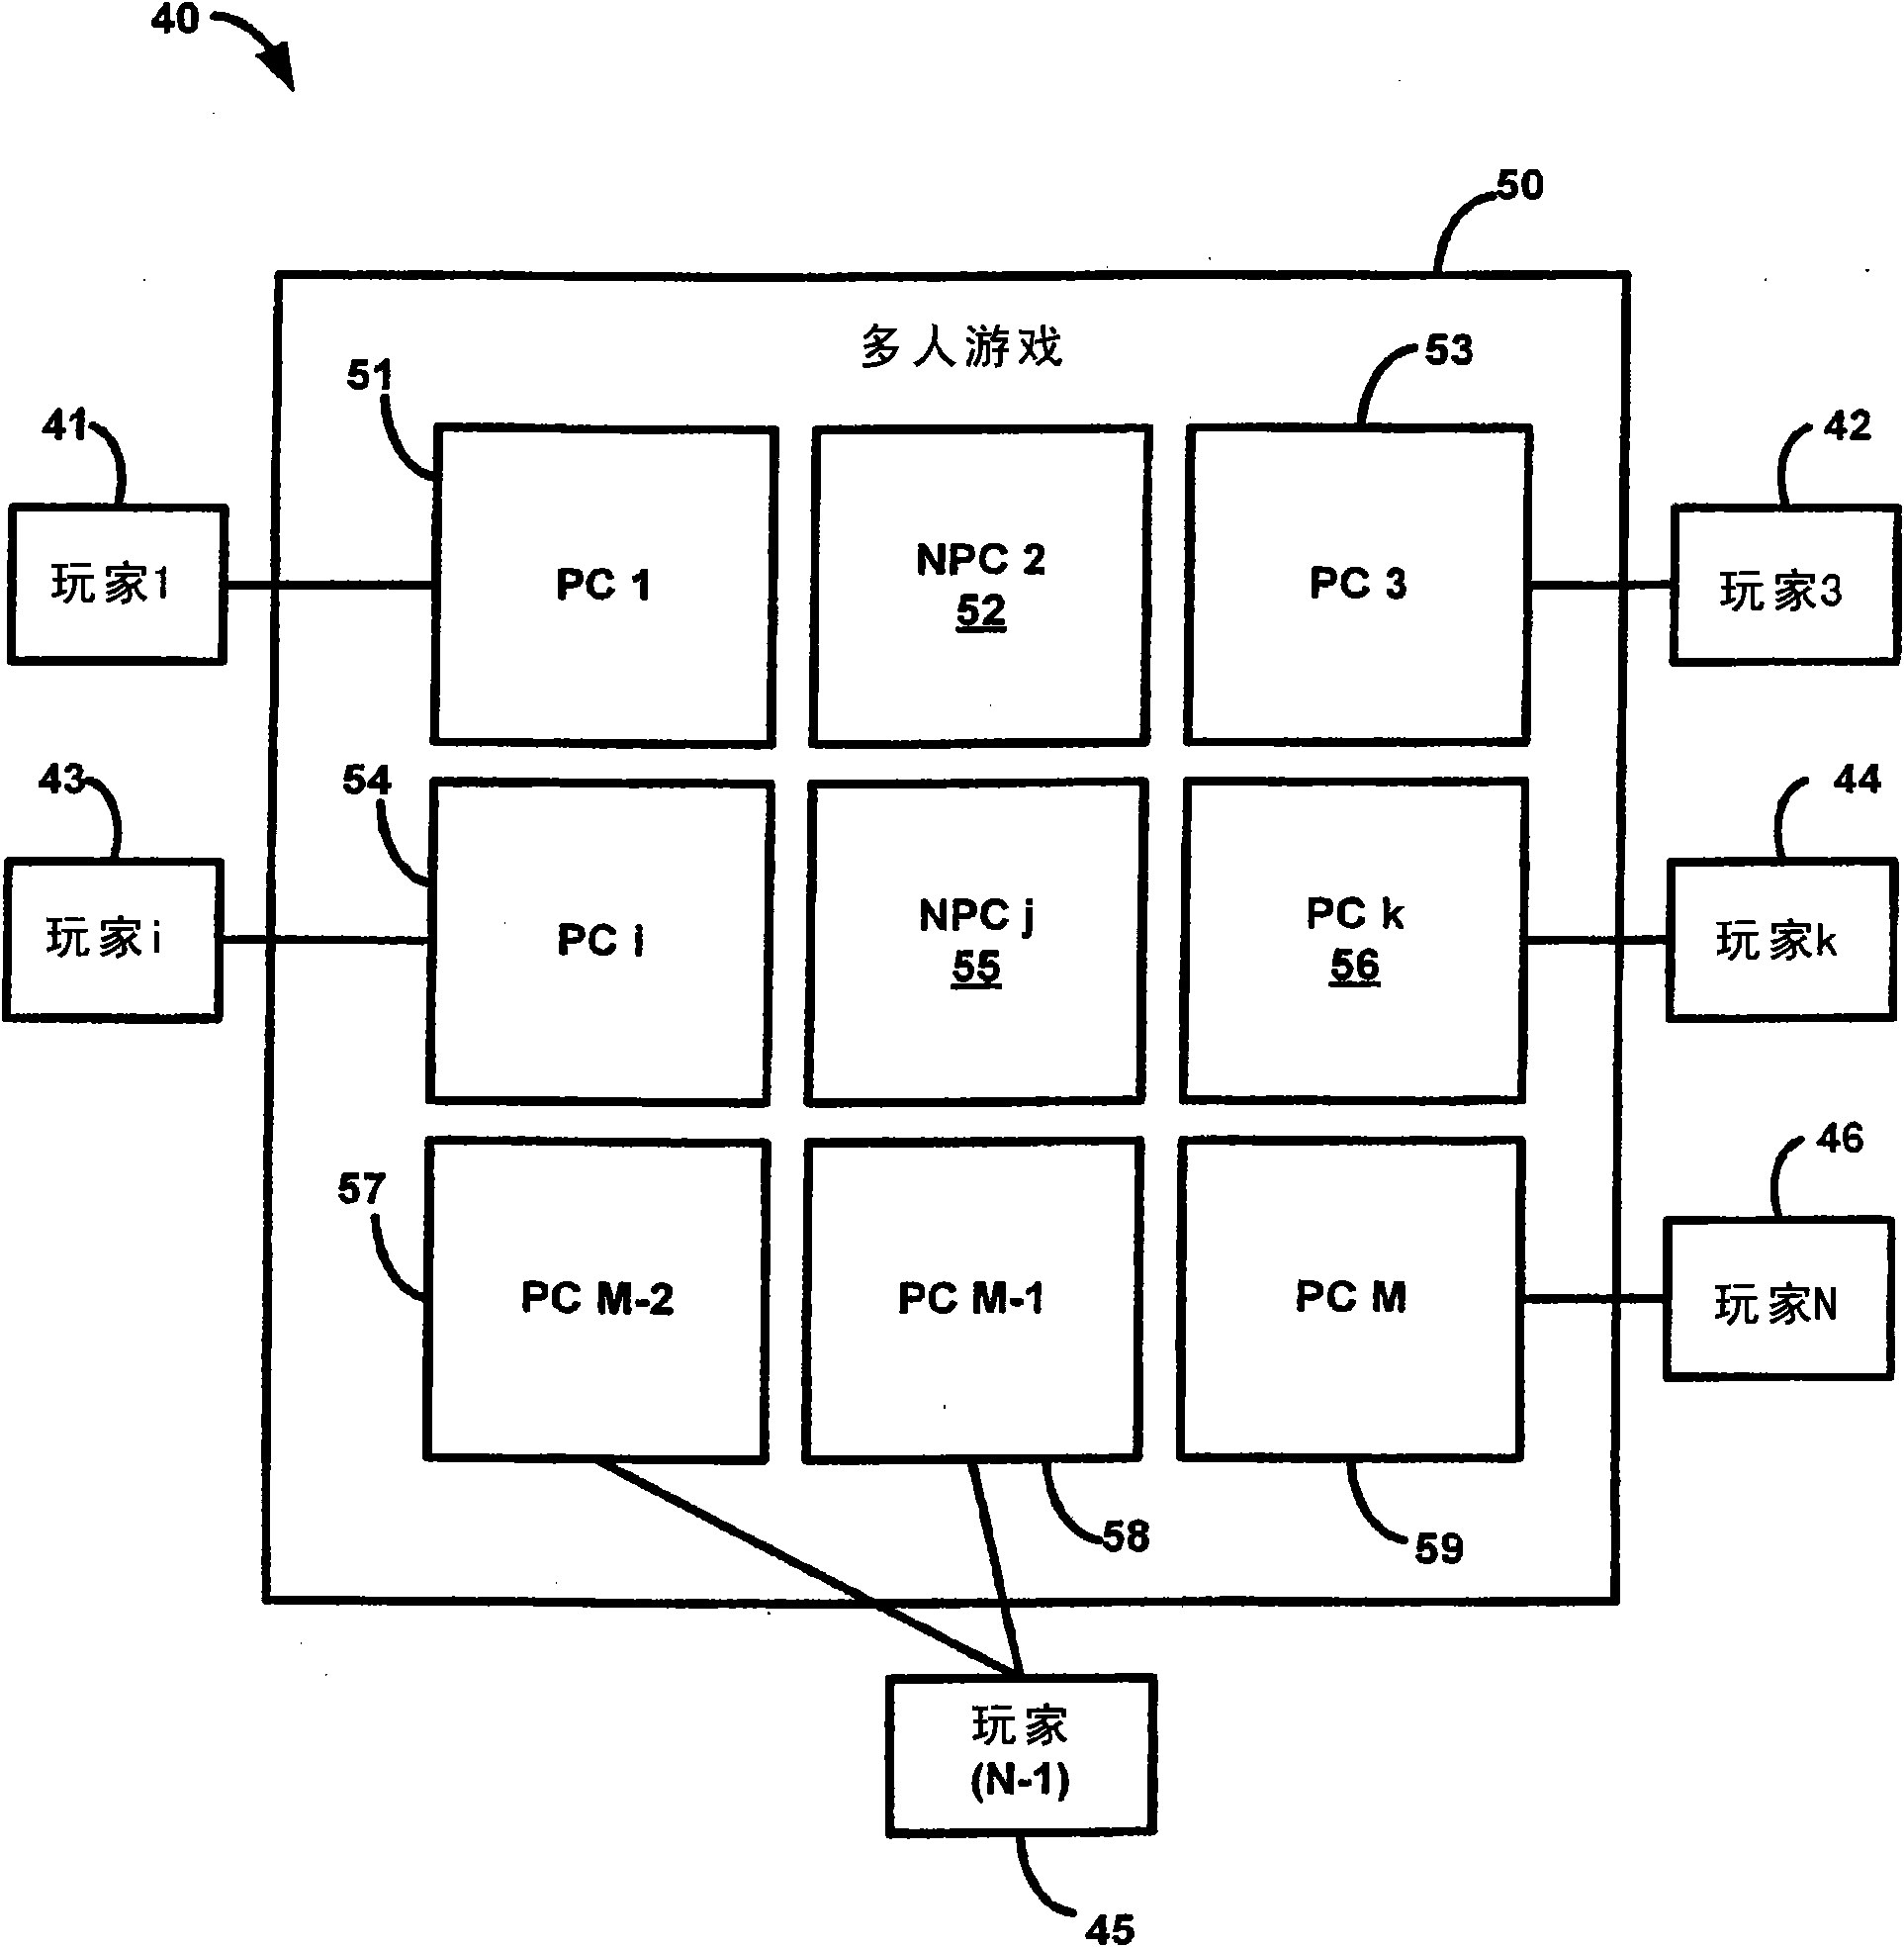 System and method for creating, editing, and sharing video content relating to video game events